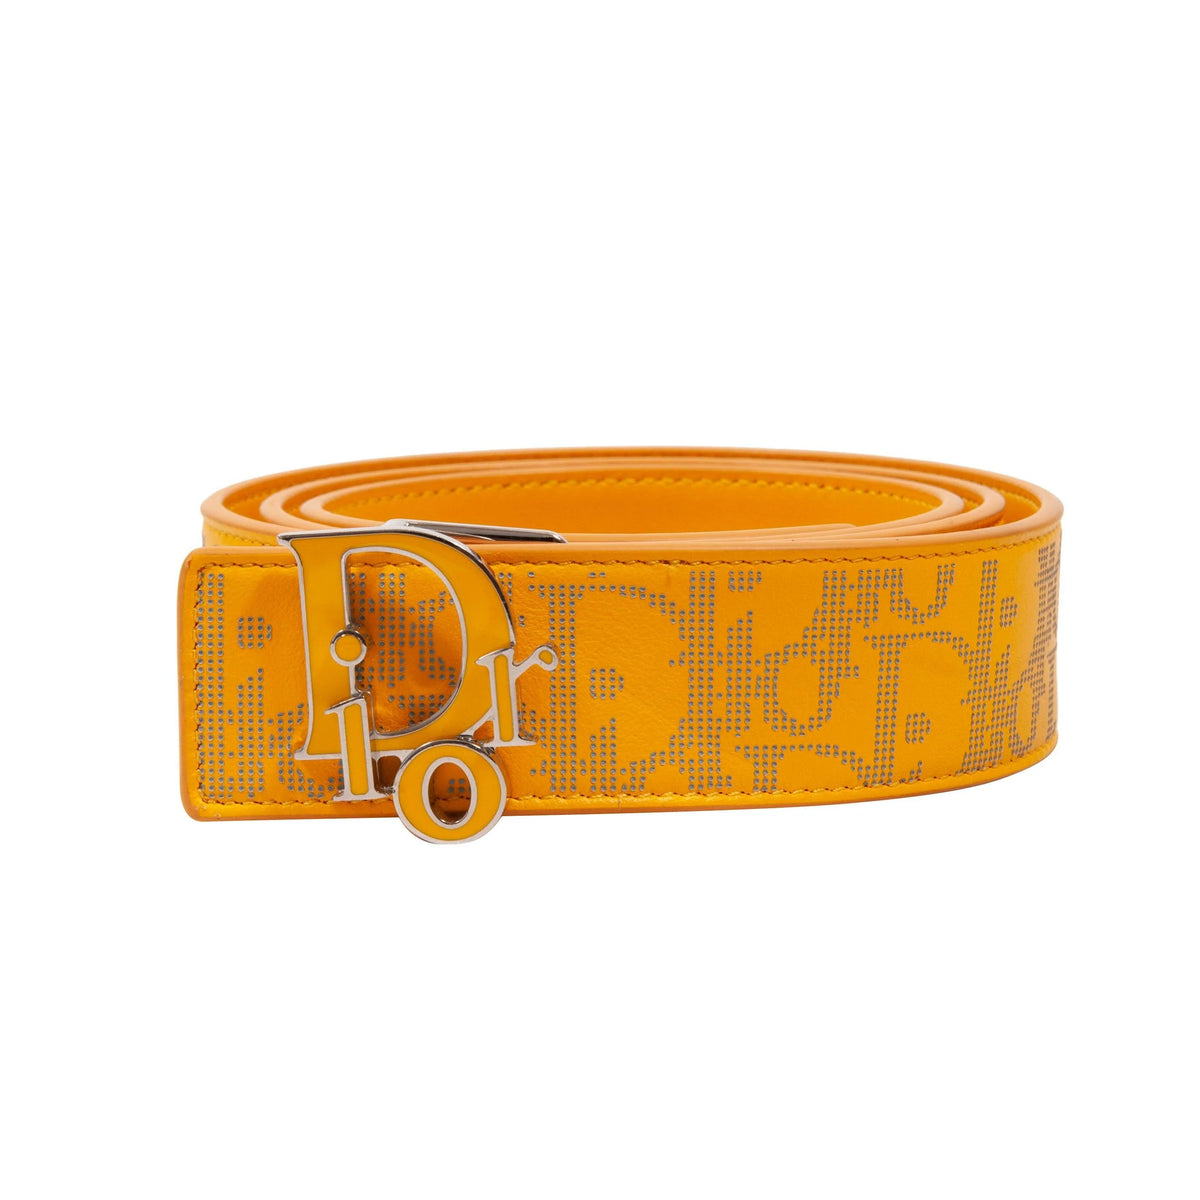 WORLD TOUR REVERSIBLE YELLOW DIOR CALFSKIN LEATHER BELT (Preowned)